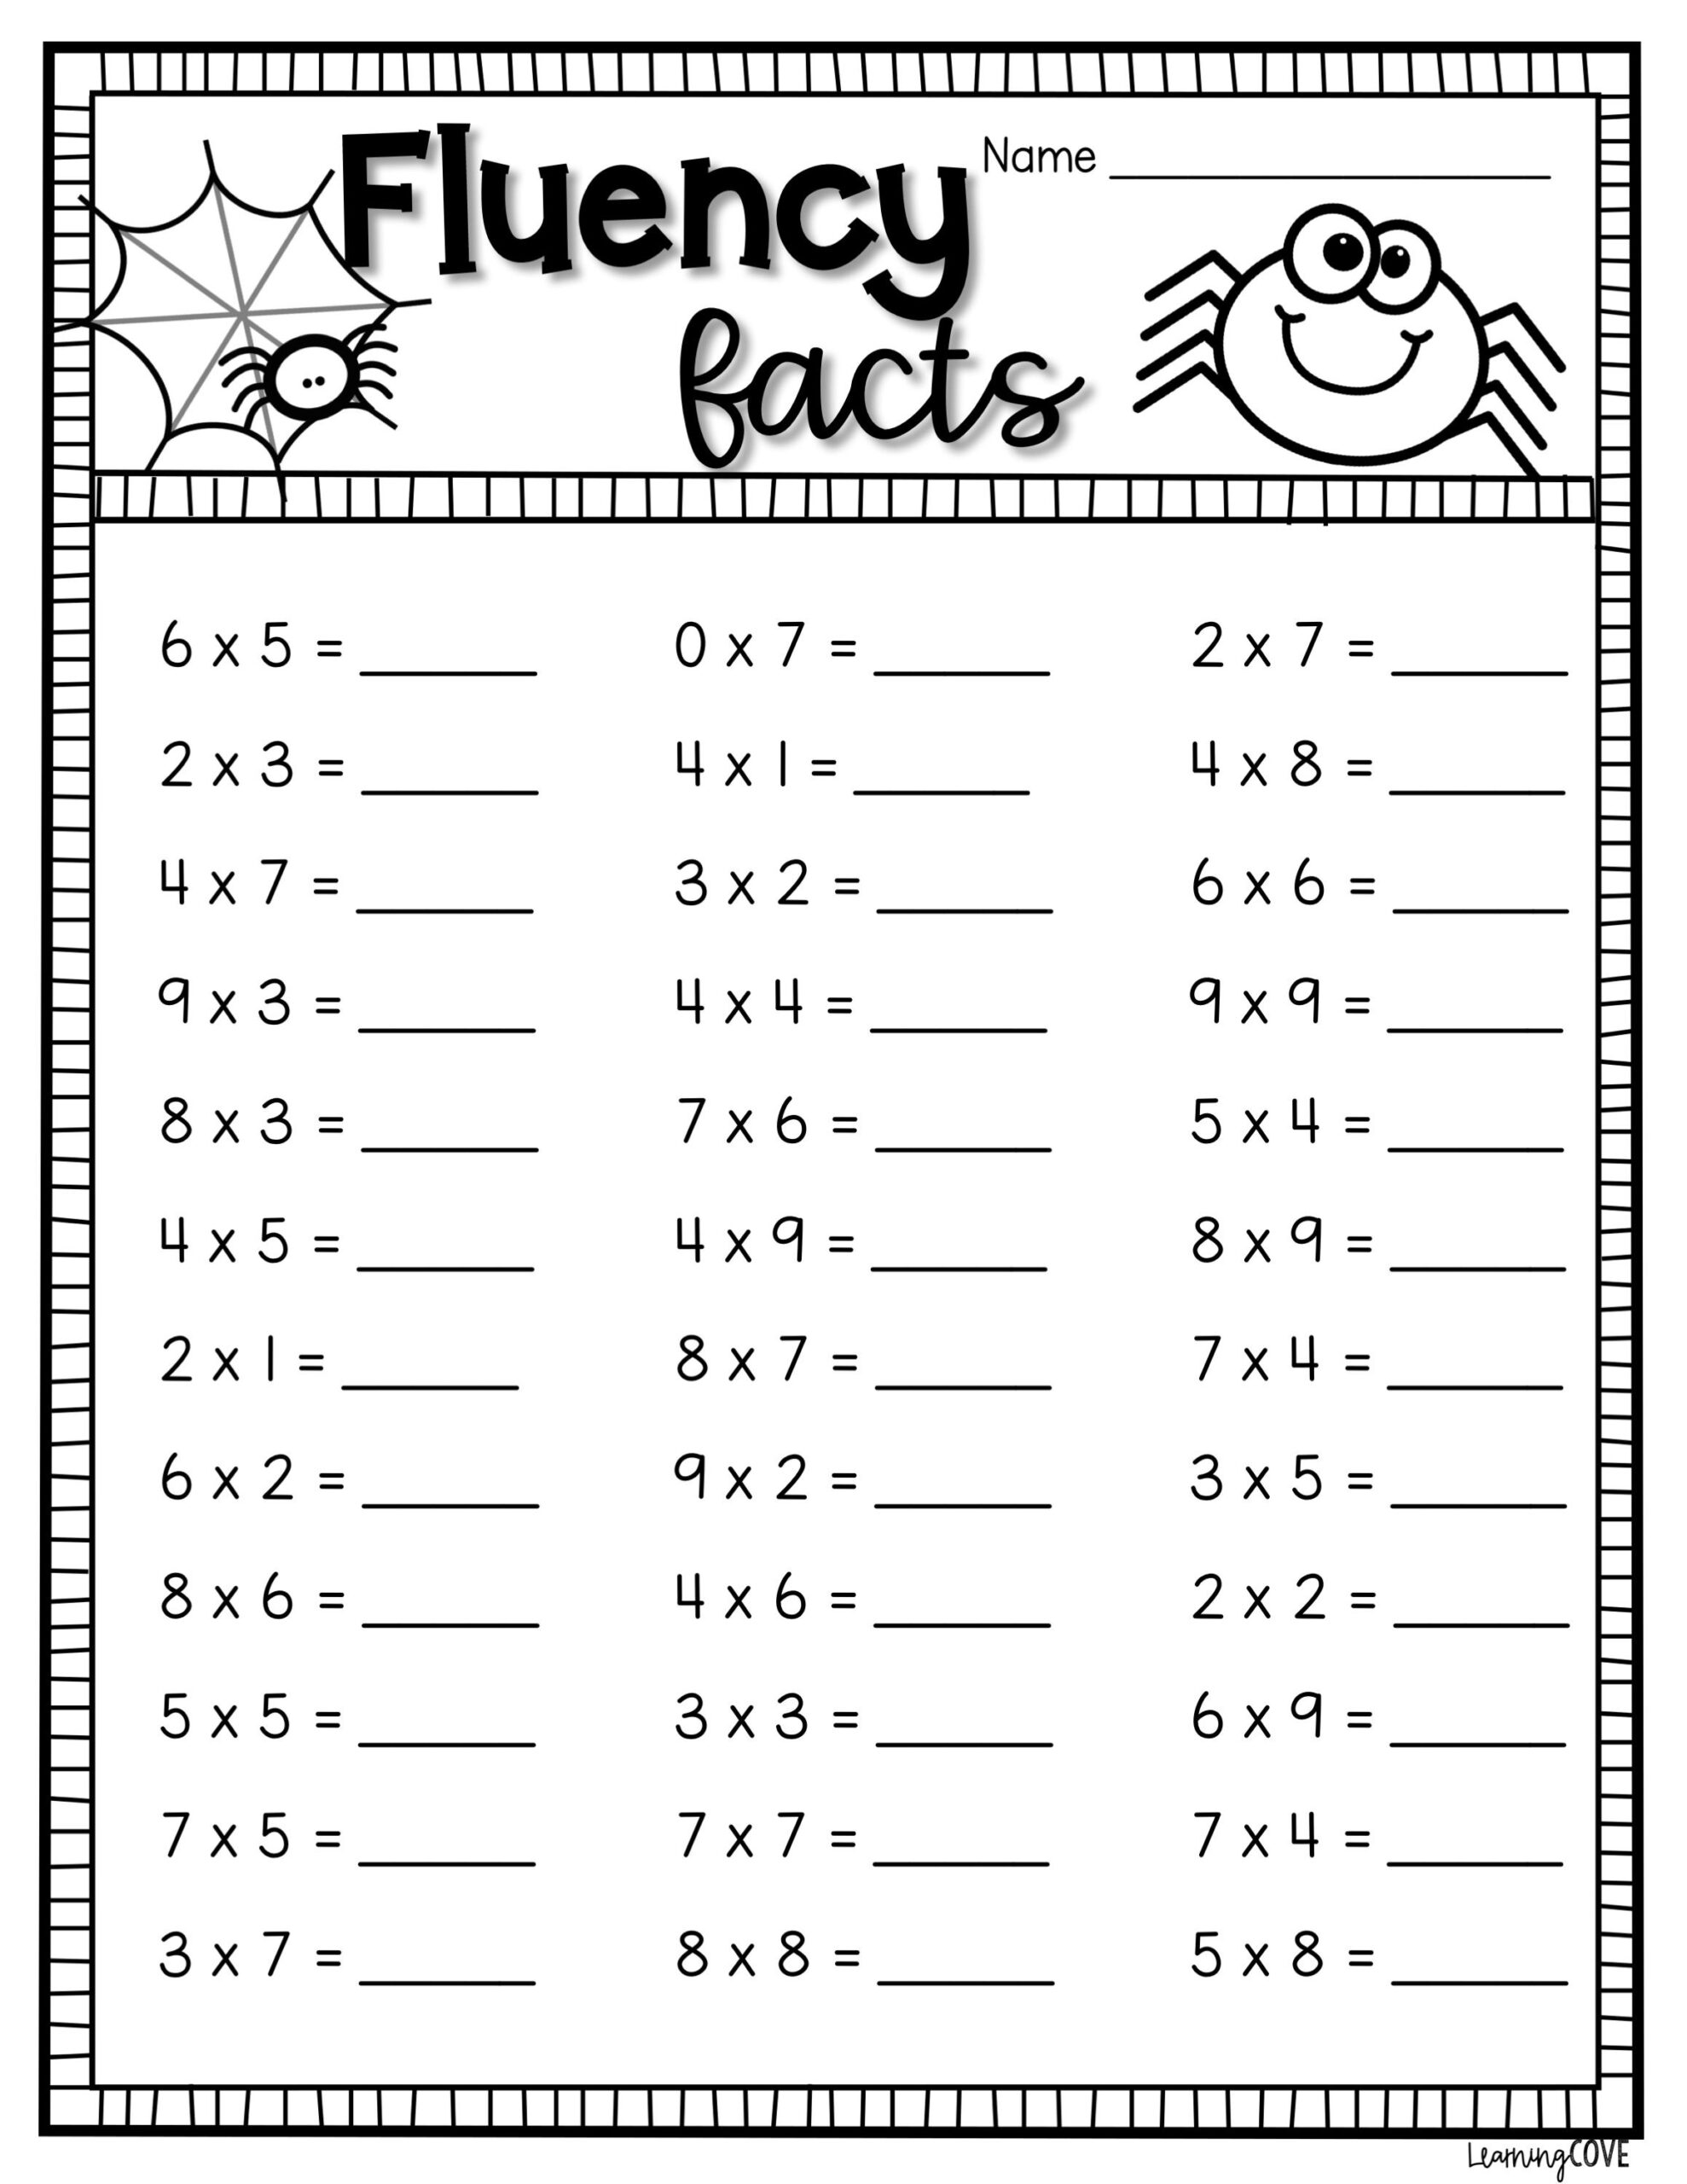 halloween-math-multiplication-worksheets-printable-word-searches